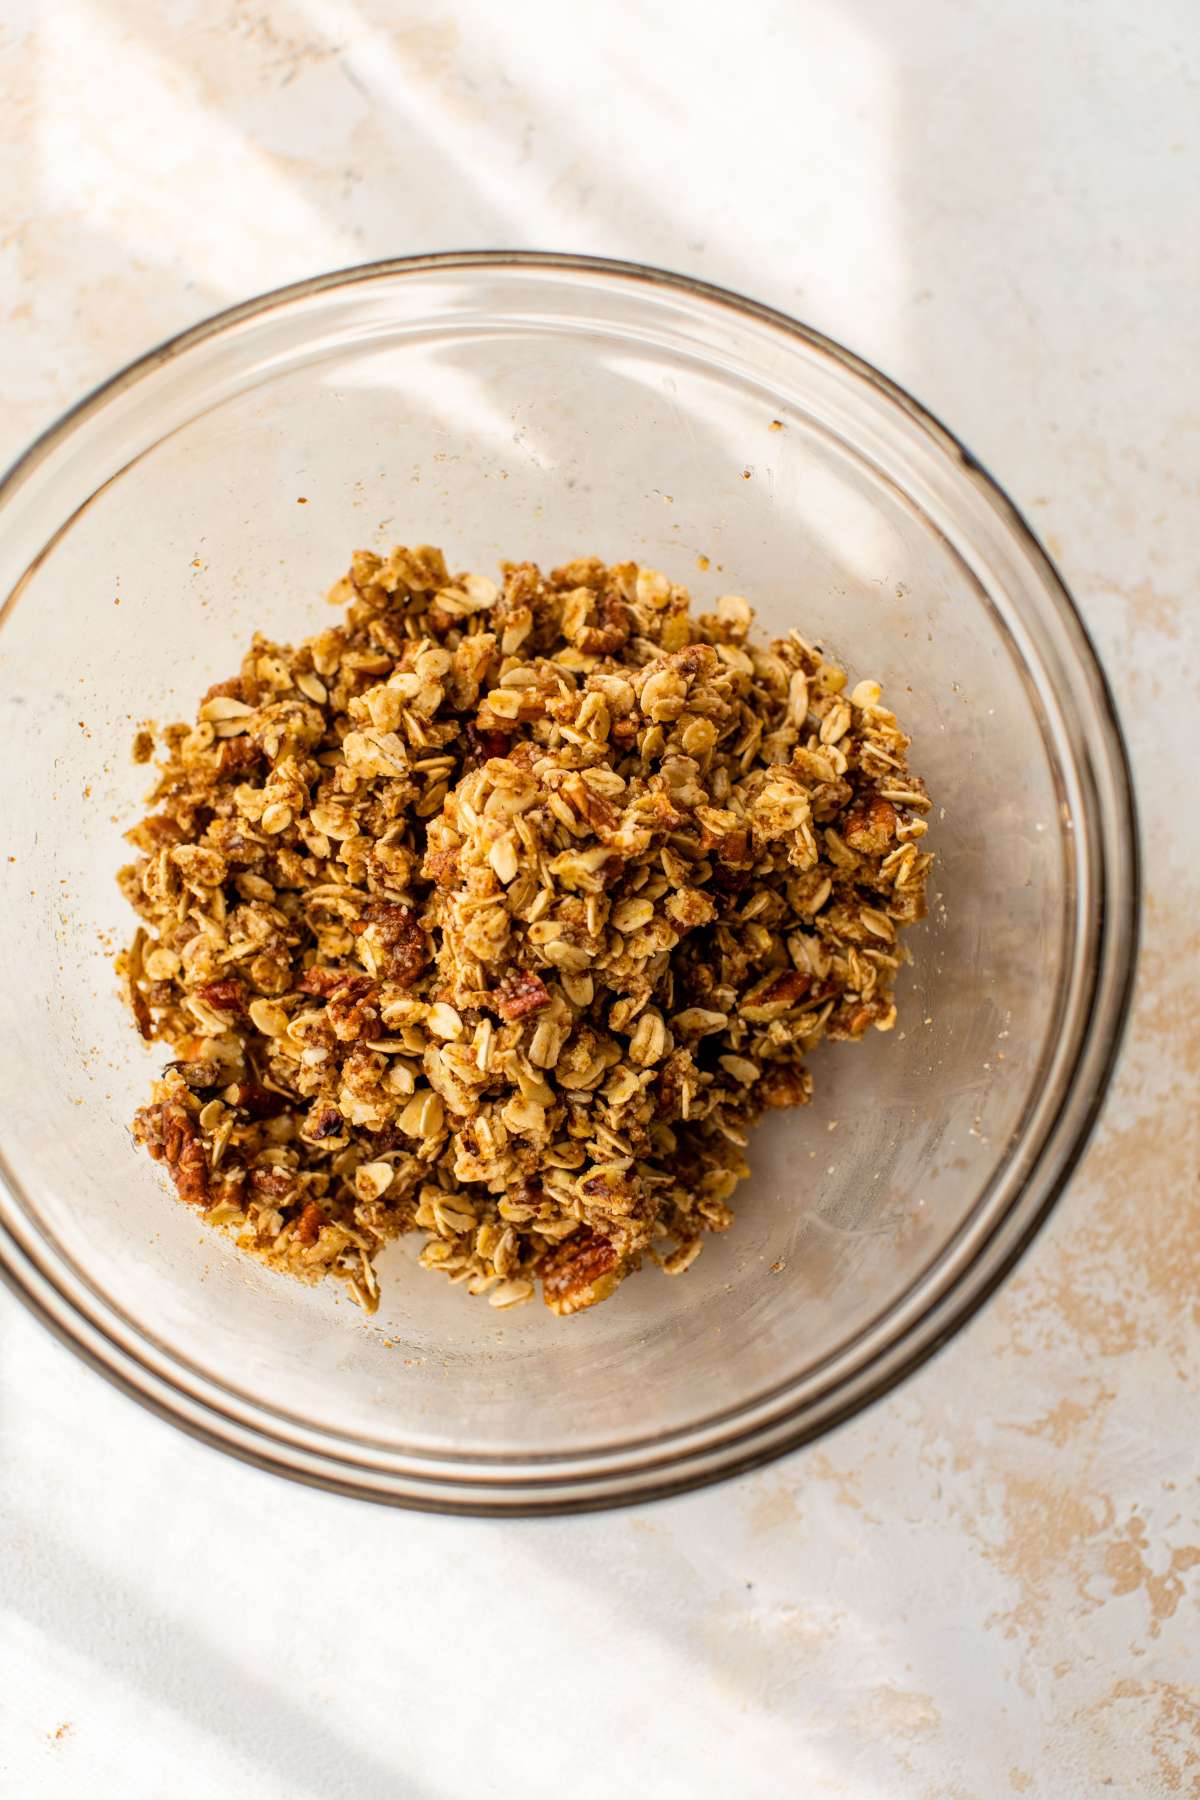 Pecan oat topping in a glass bowl.